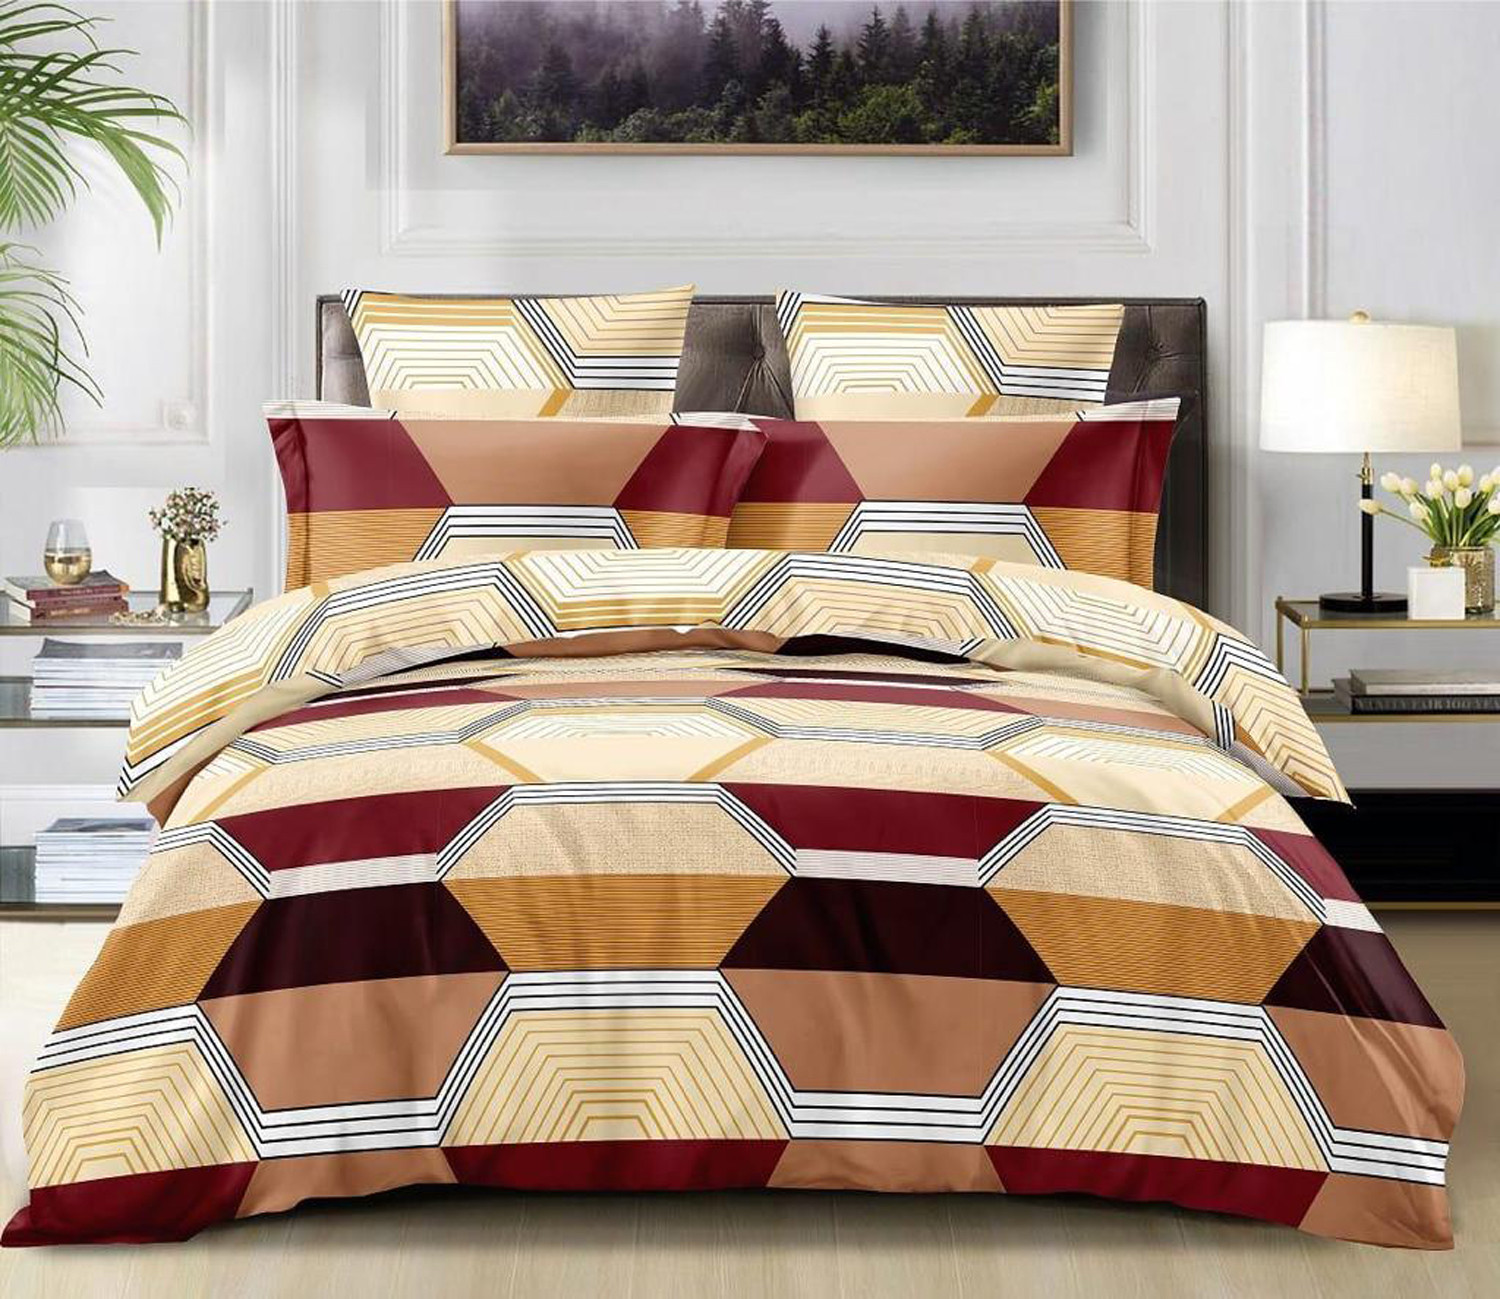 Kuber Industries Geometric Print Glace Cotton Double Bedsheet with 2 Pillow Covers (Cream & Brown)